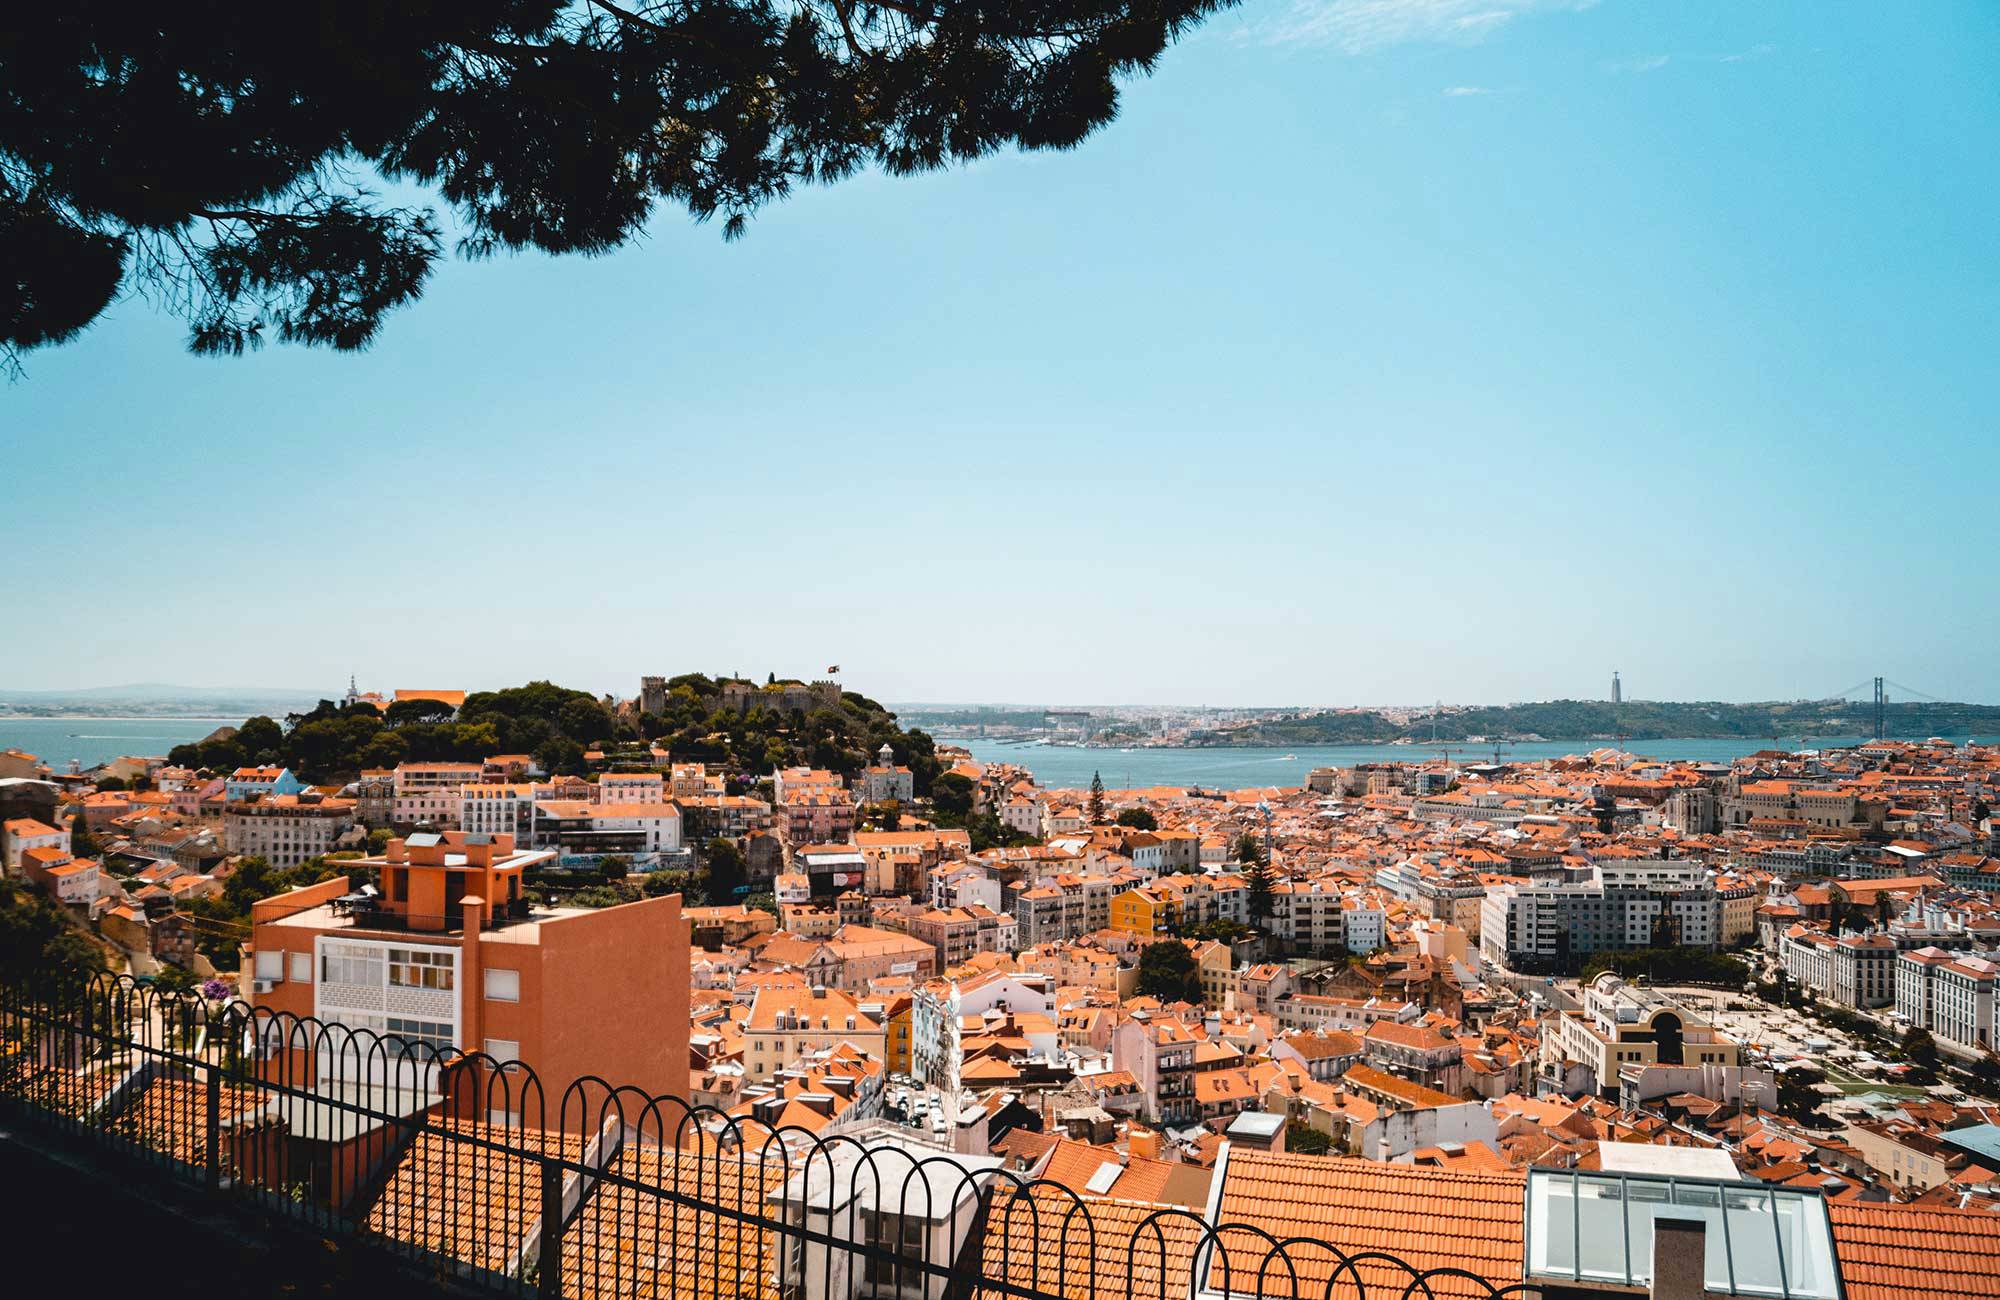 Portugal Lisbon City From The Rooftops